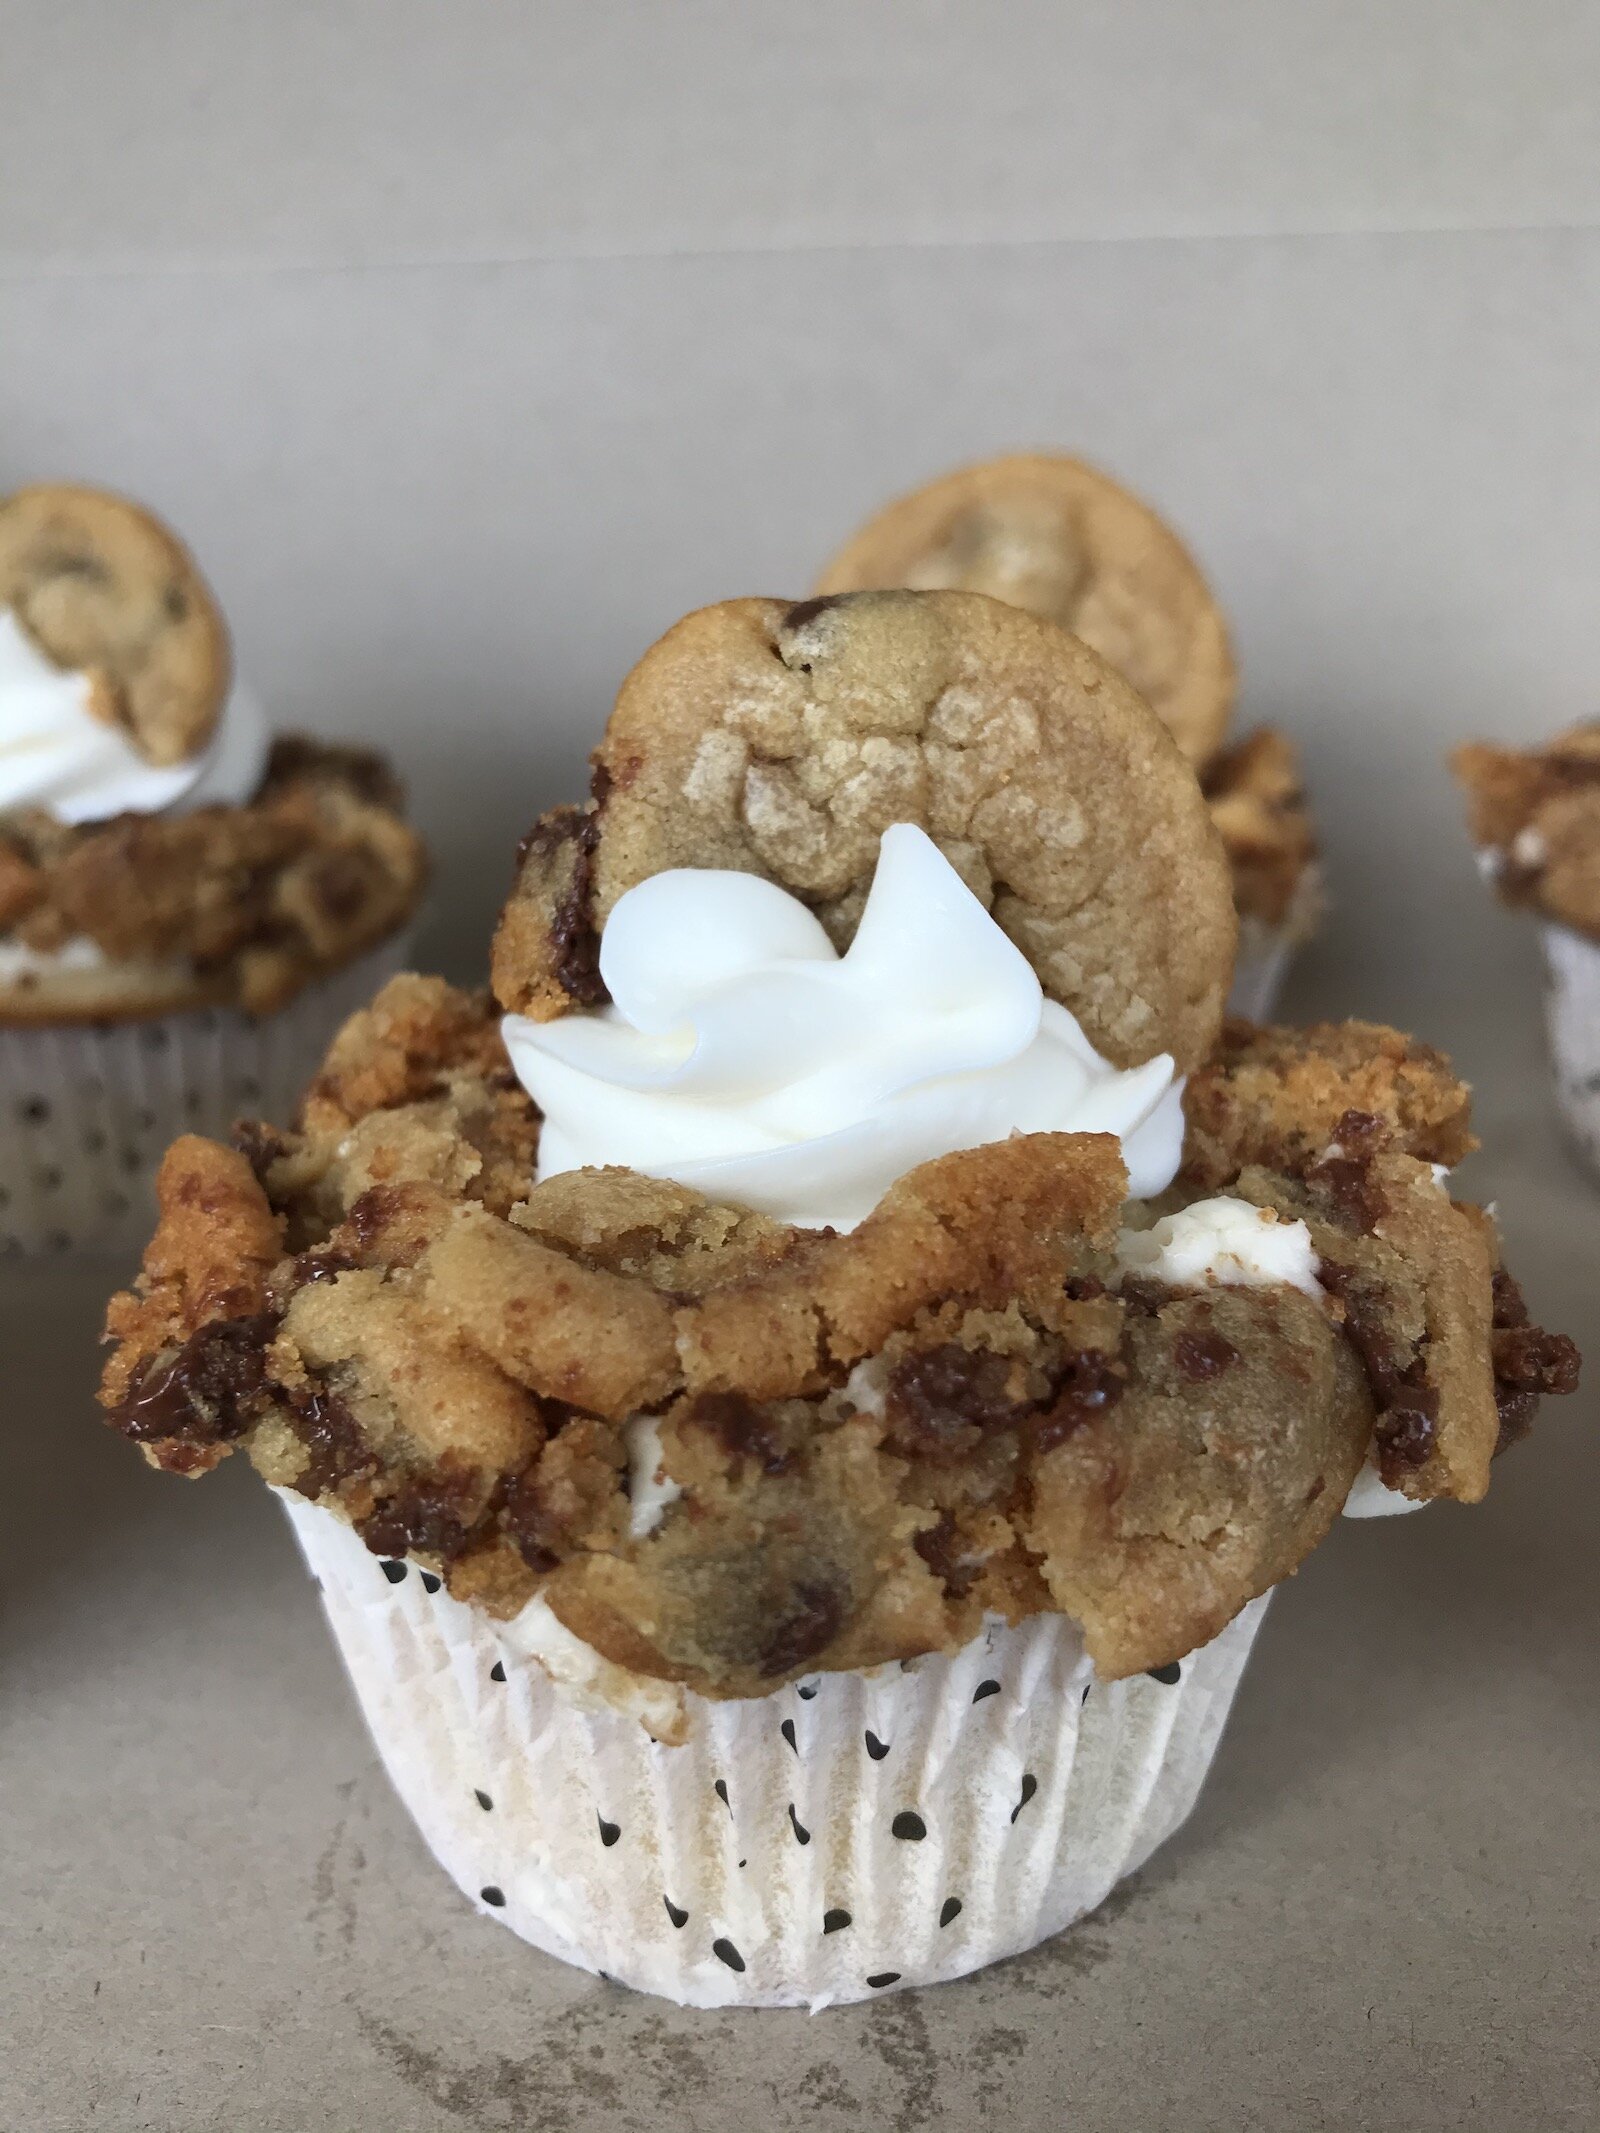 A cookie dough cupcake, made by Puff's Pastries.